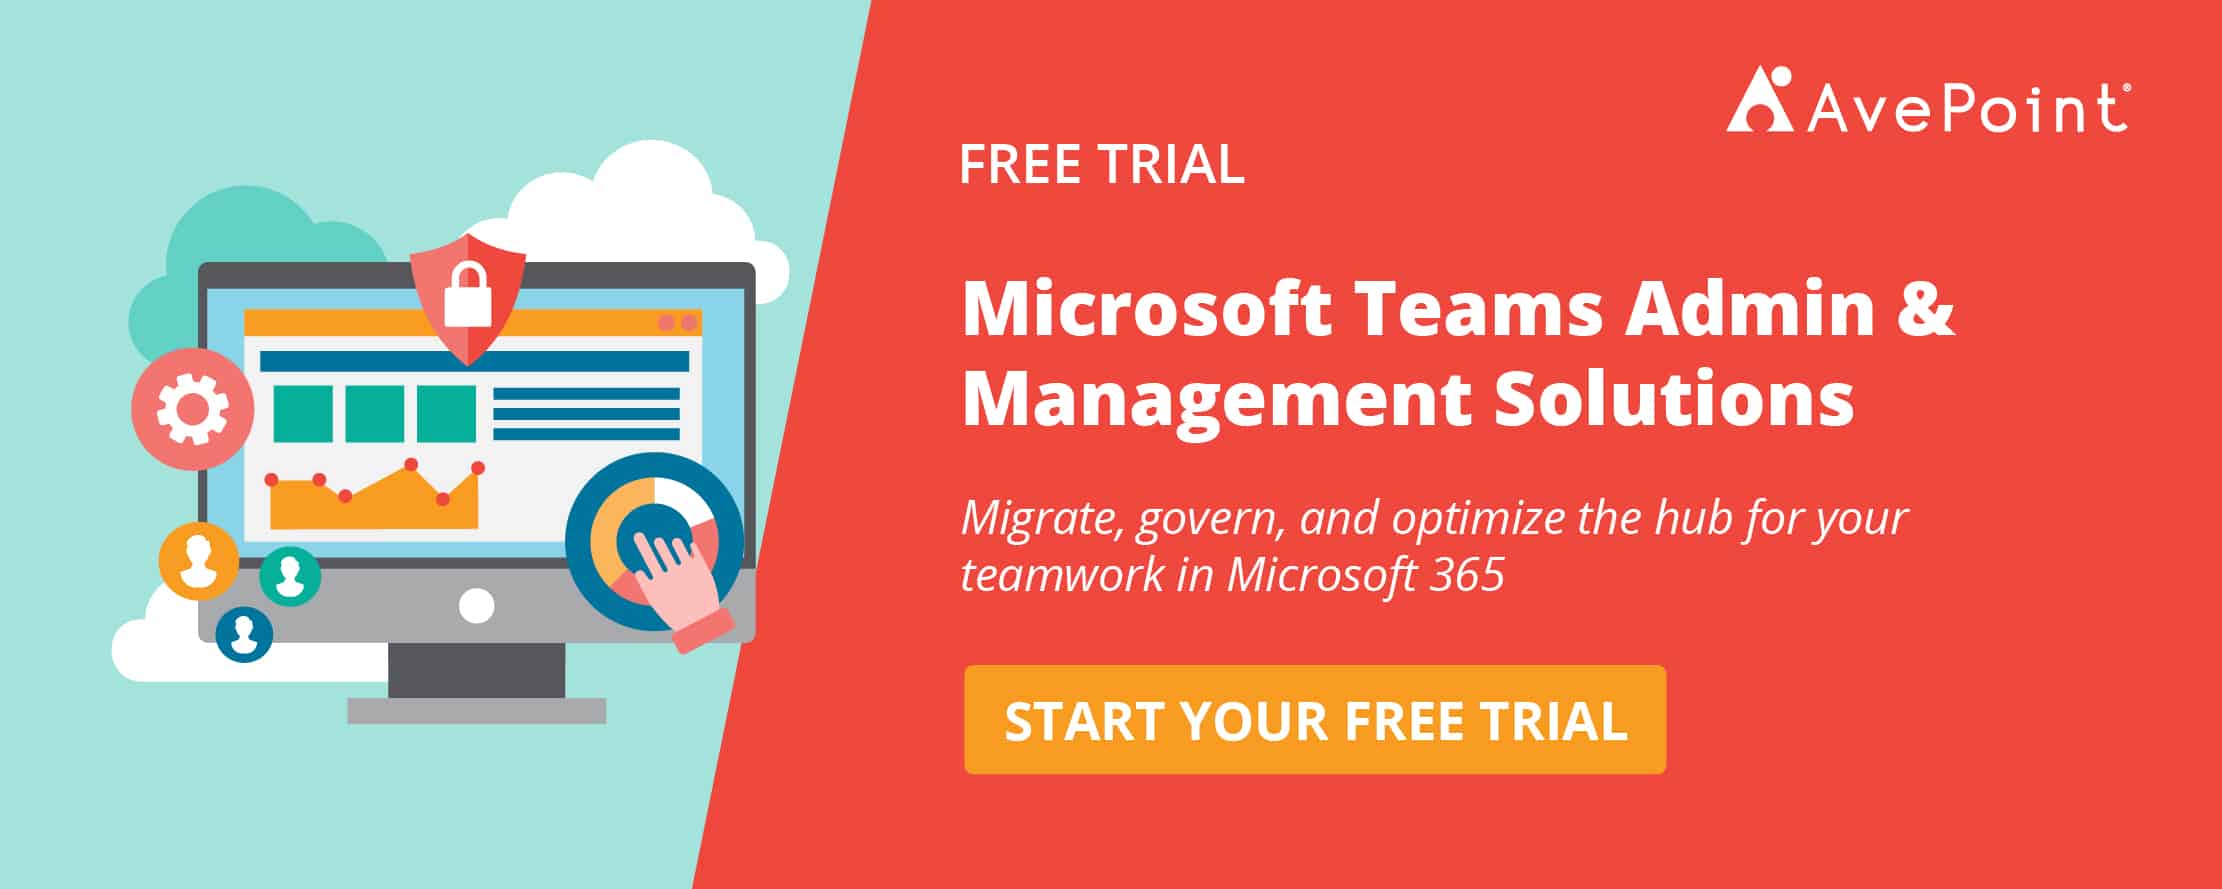 microsoft-teams-admin-management-solution-avepoint